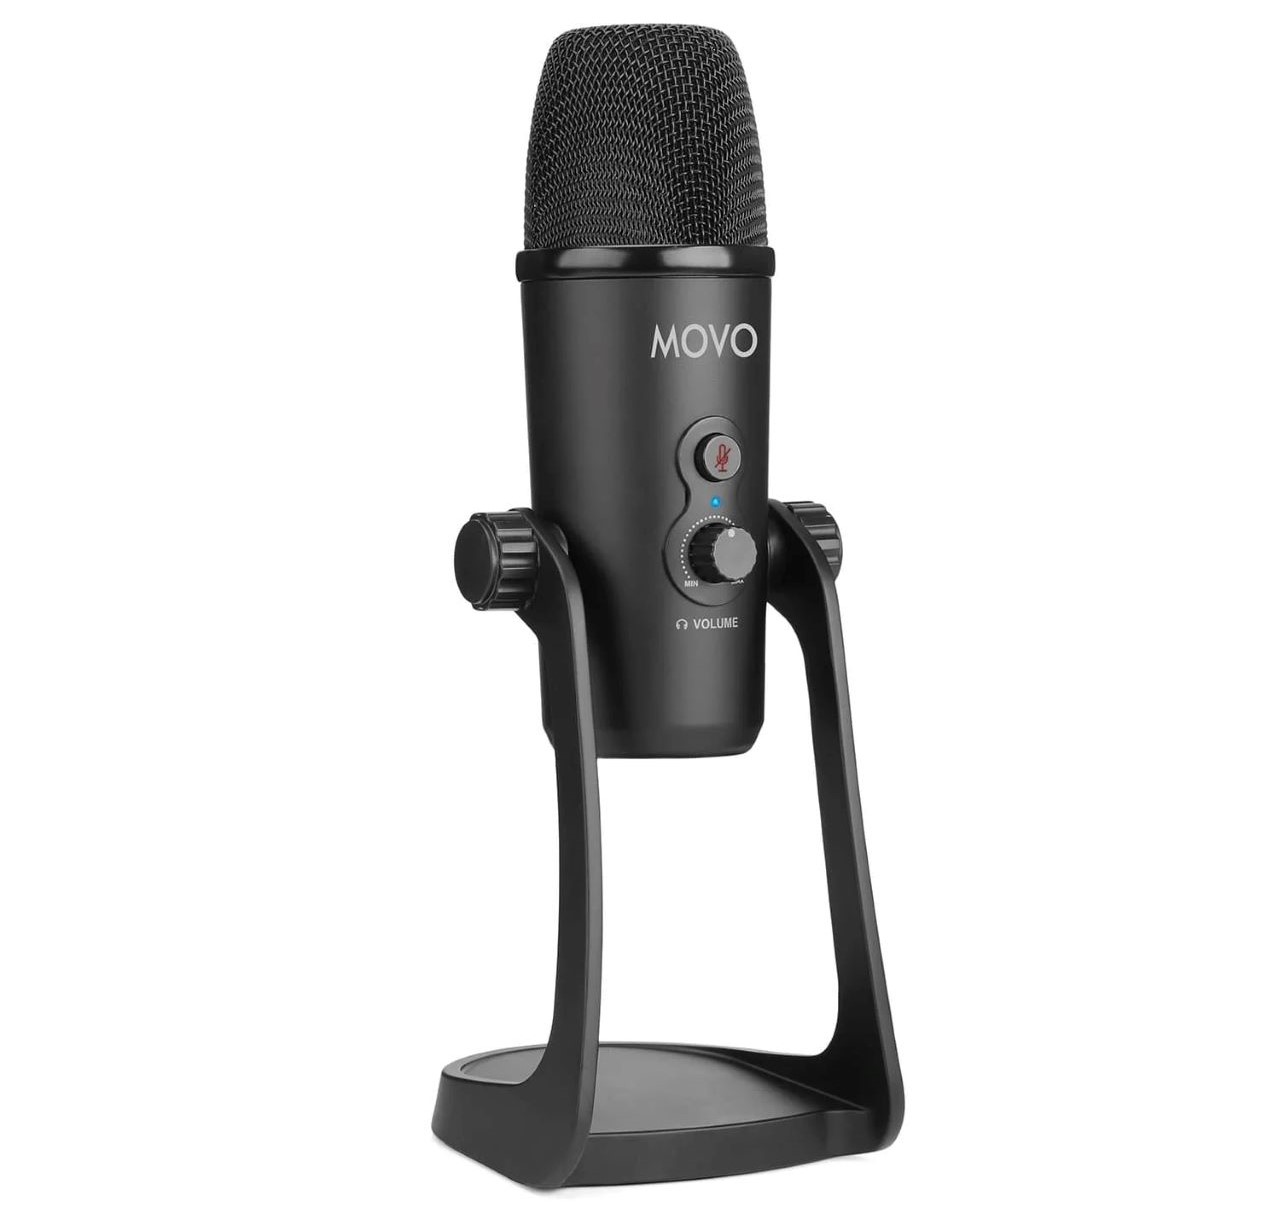 The UM700, one of Shure MV7 alternatives, is Plug and play: Seamless compatibility via USB for Windows or Mac. 